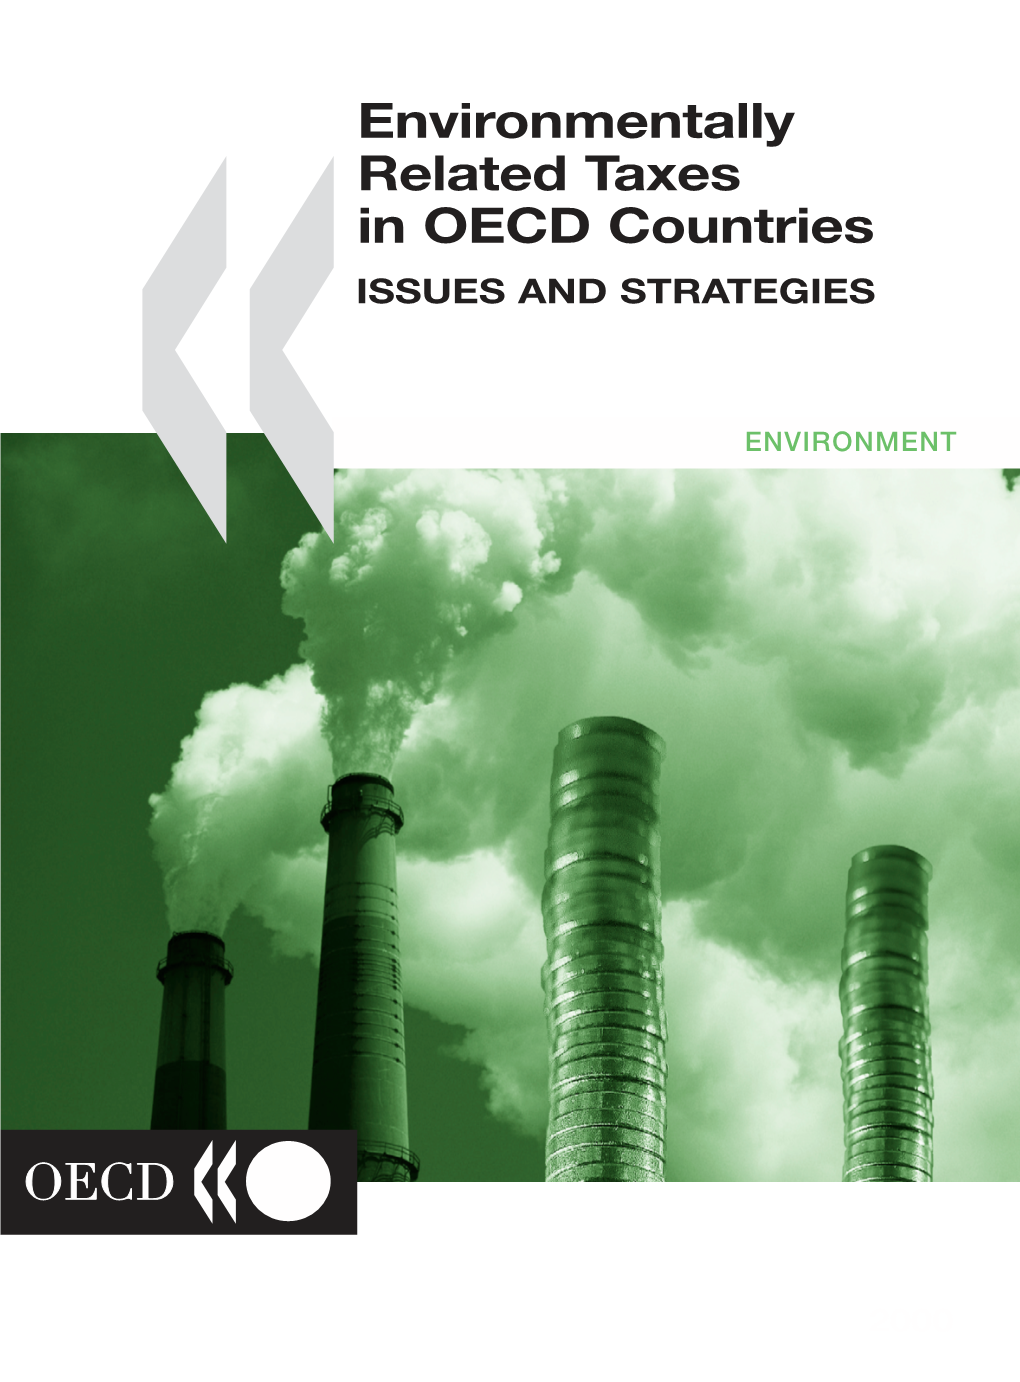 Environmentally Related Taxes in OECD Countries Context, a Distinctive Feature Is the Increasing Role of Environmentally Related Taxes